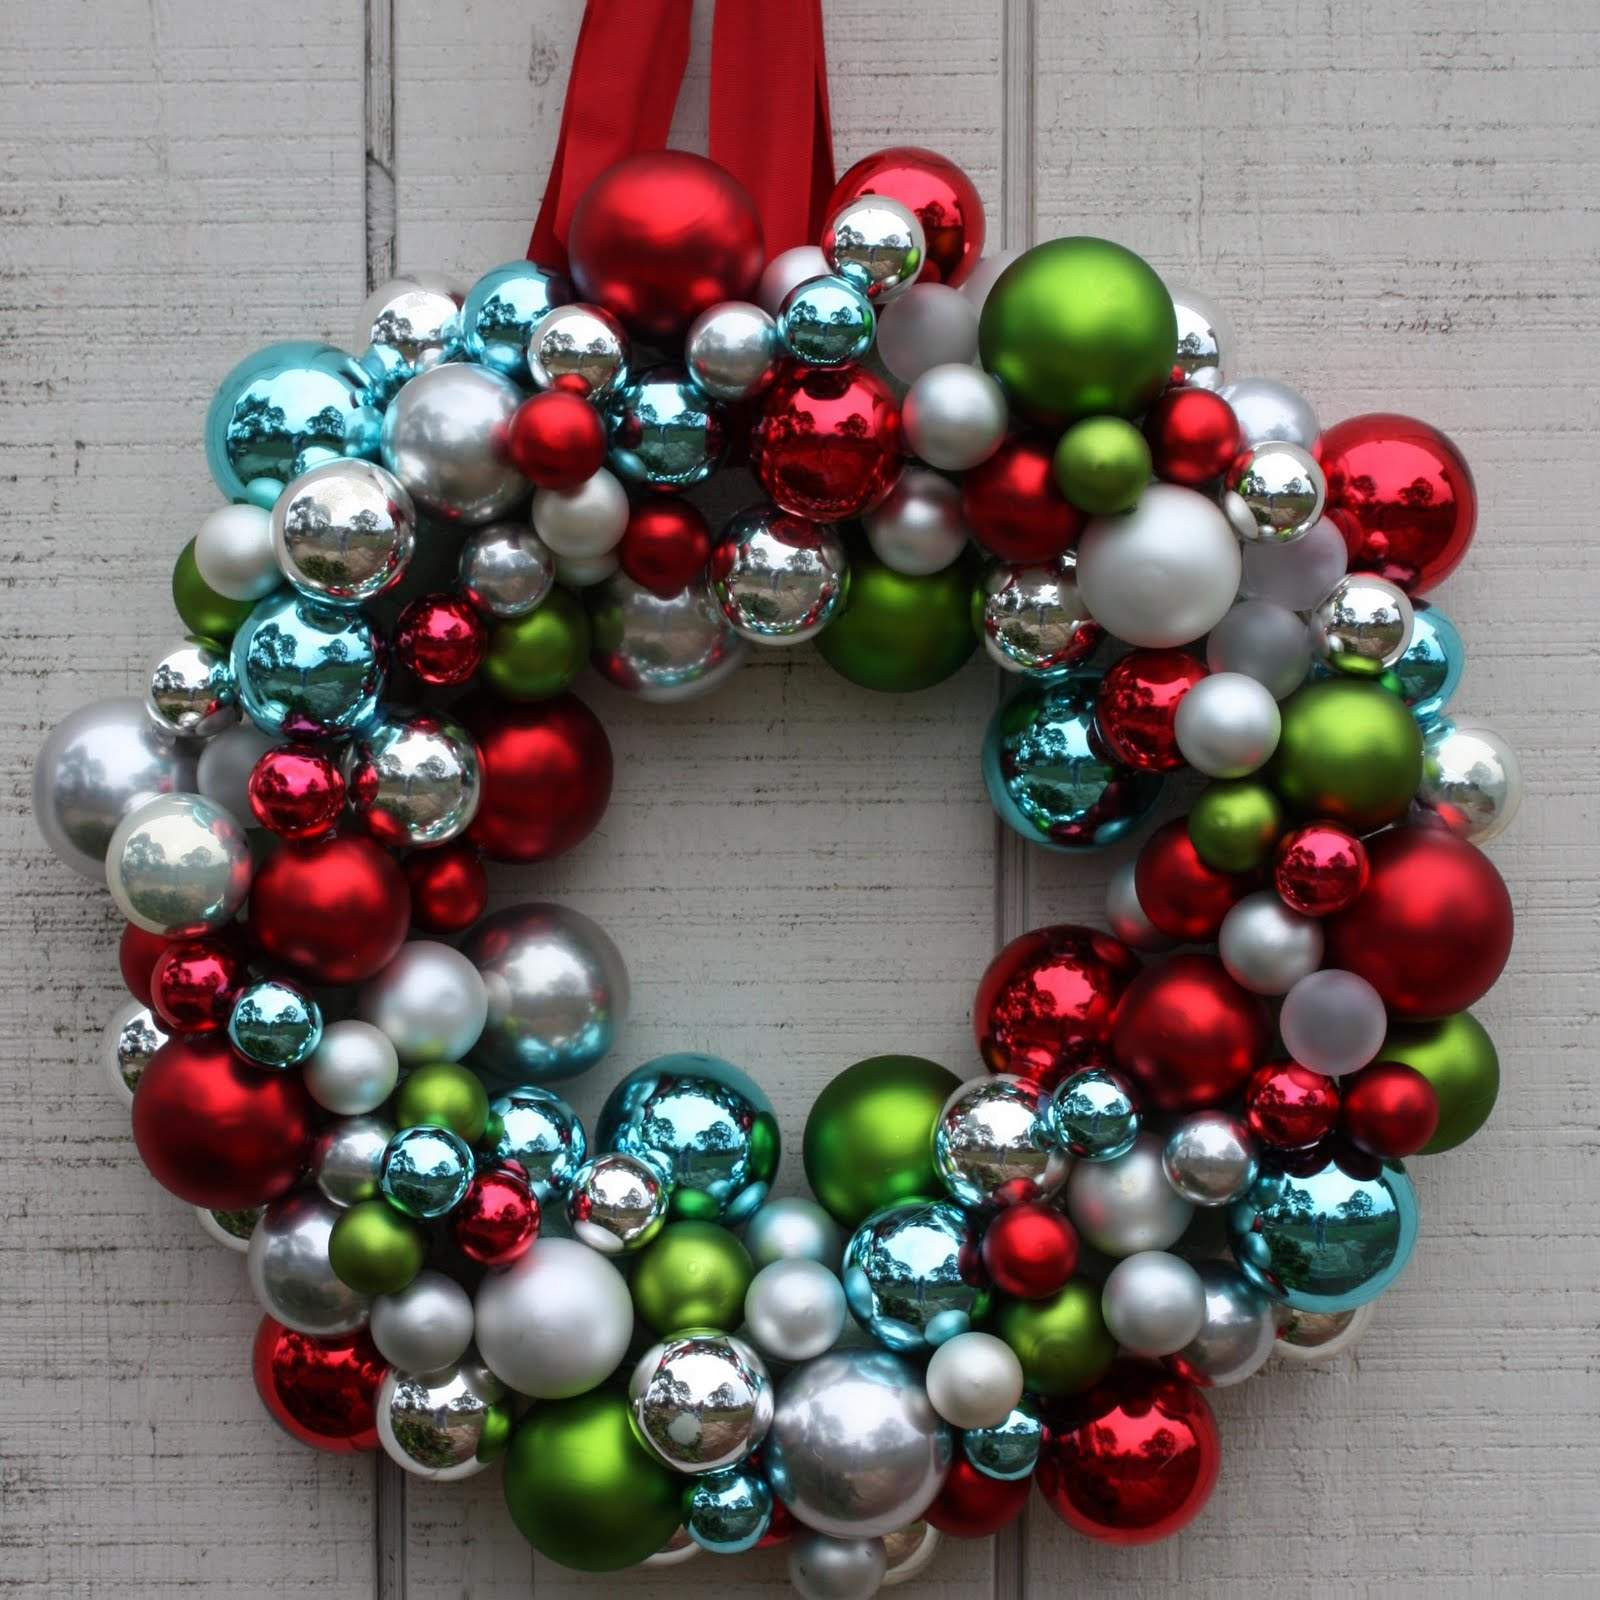 DIY Christmas Ornament Wreath
 How to Make a Christmas Wreath with Ornaments